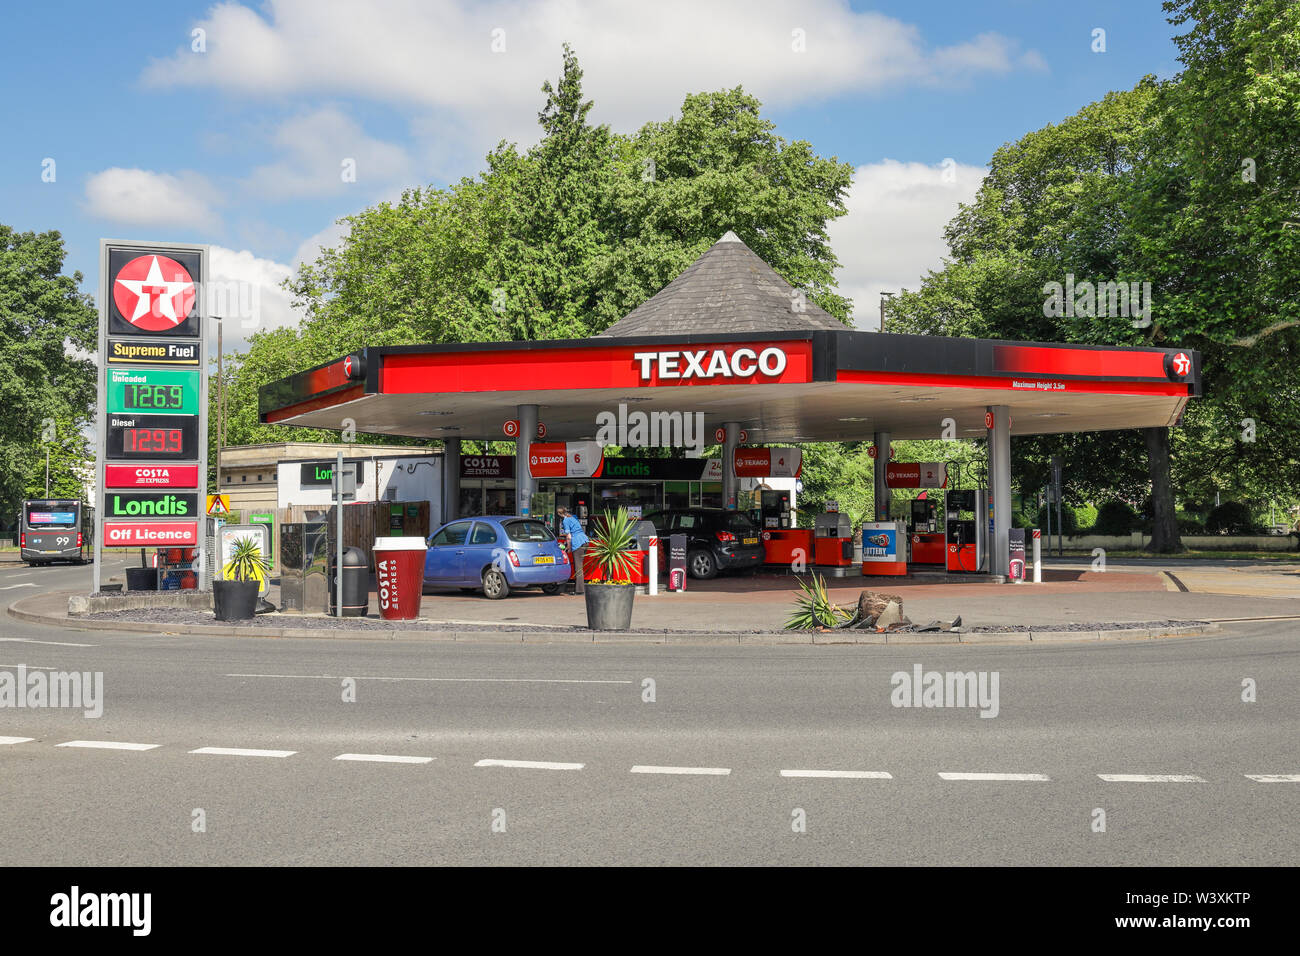 Texaco garage petrol station showing petrol and diesel prices with young woman filling up her car Stock Photo